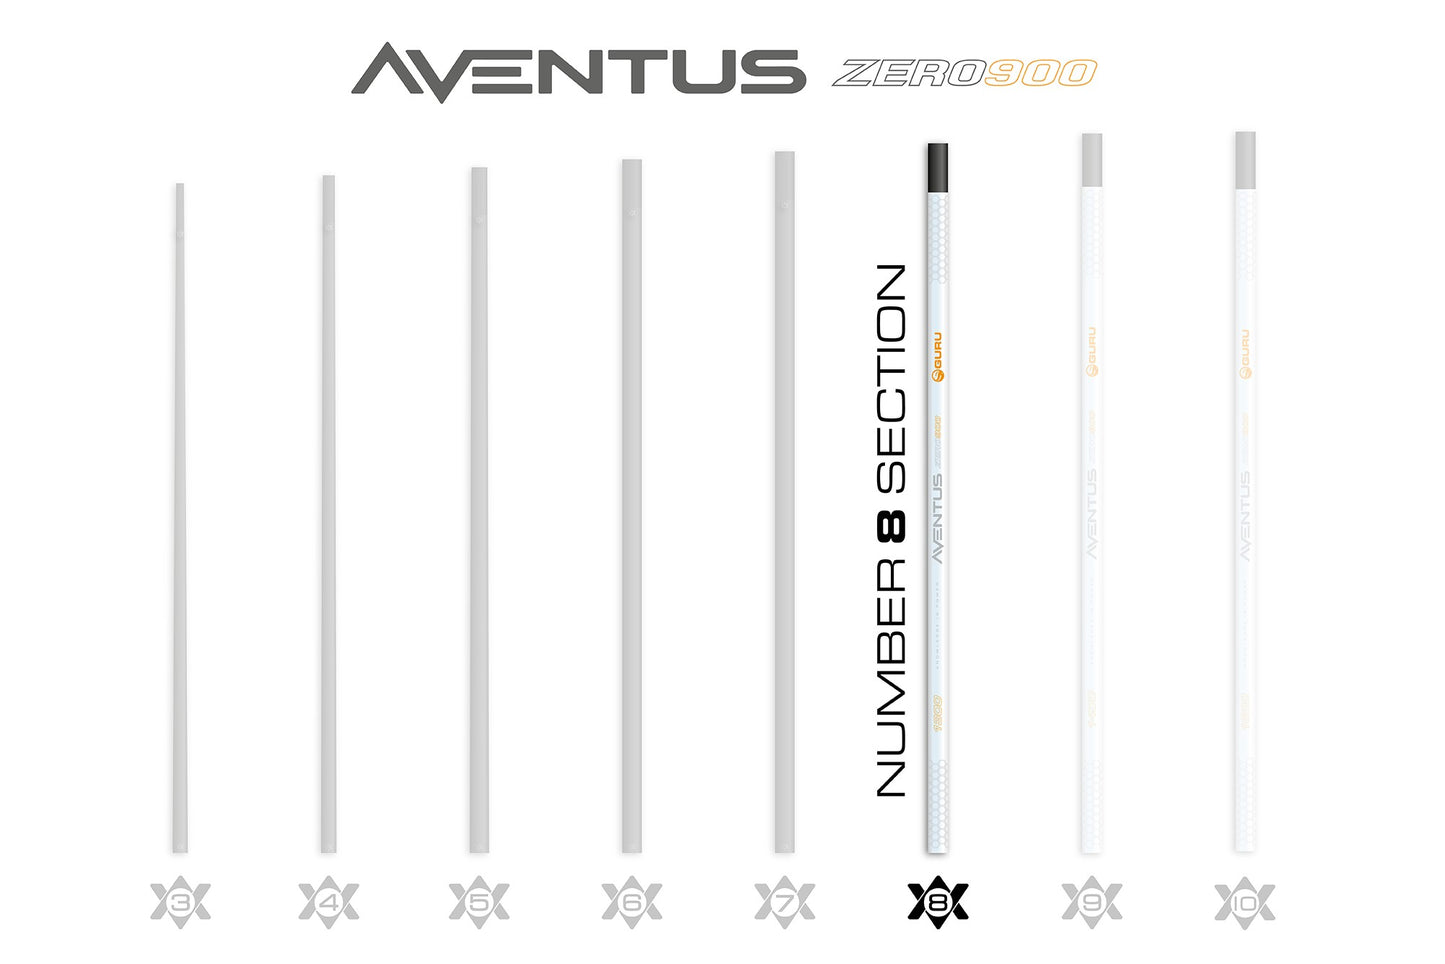 Aventus Z900 Section No.8